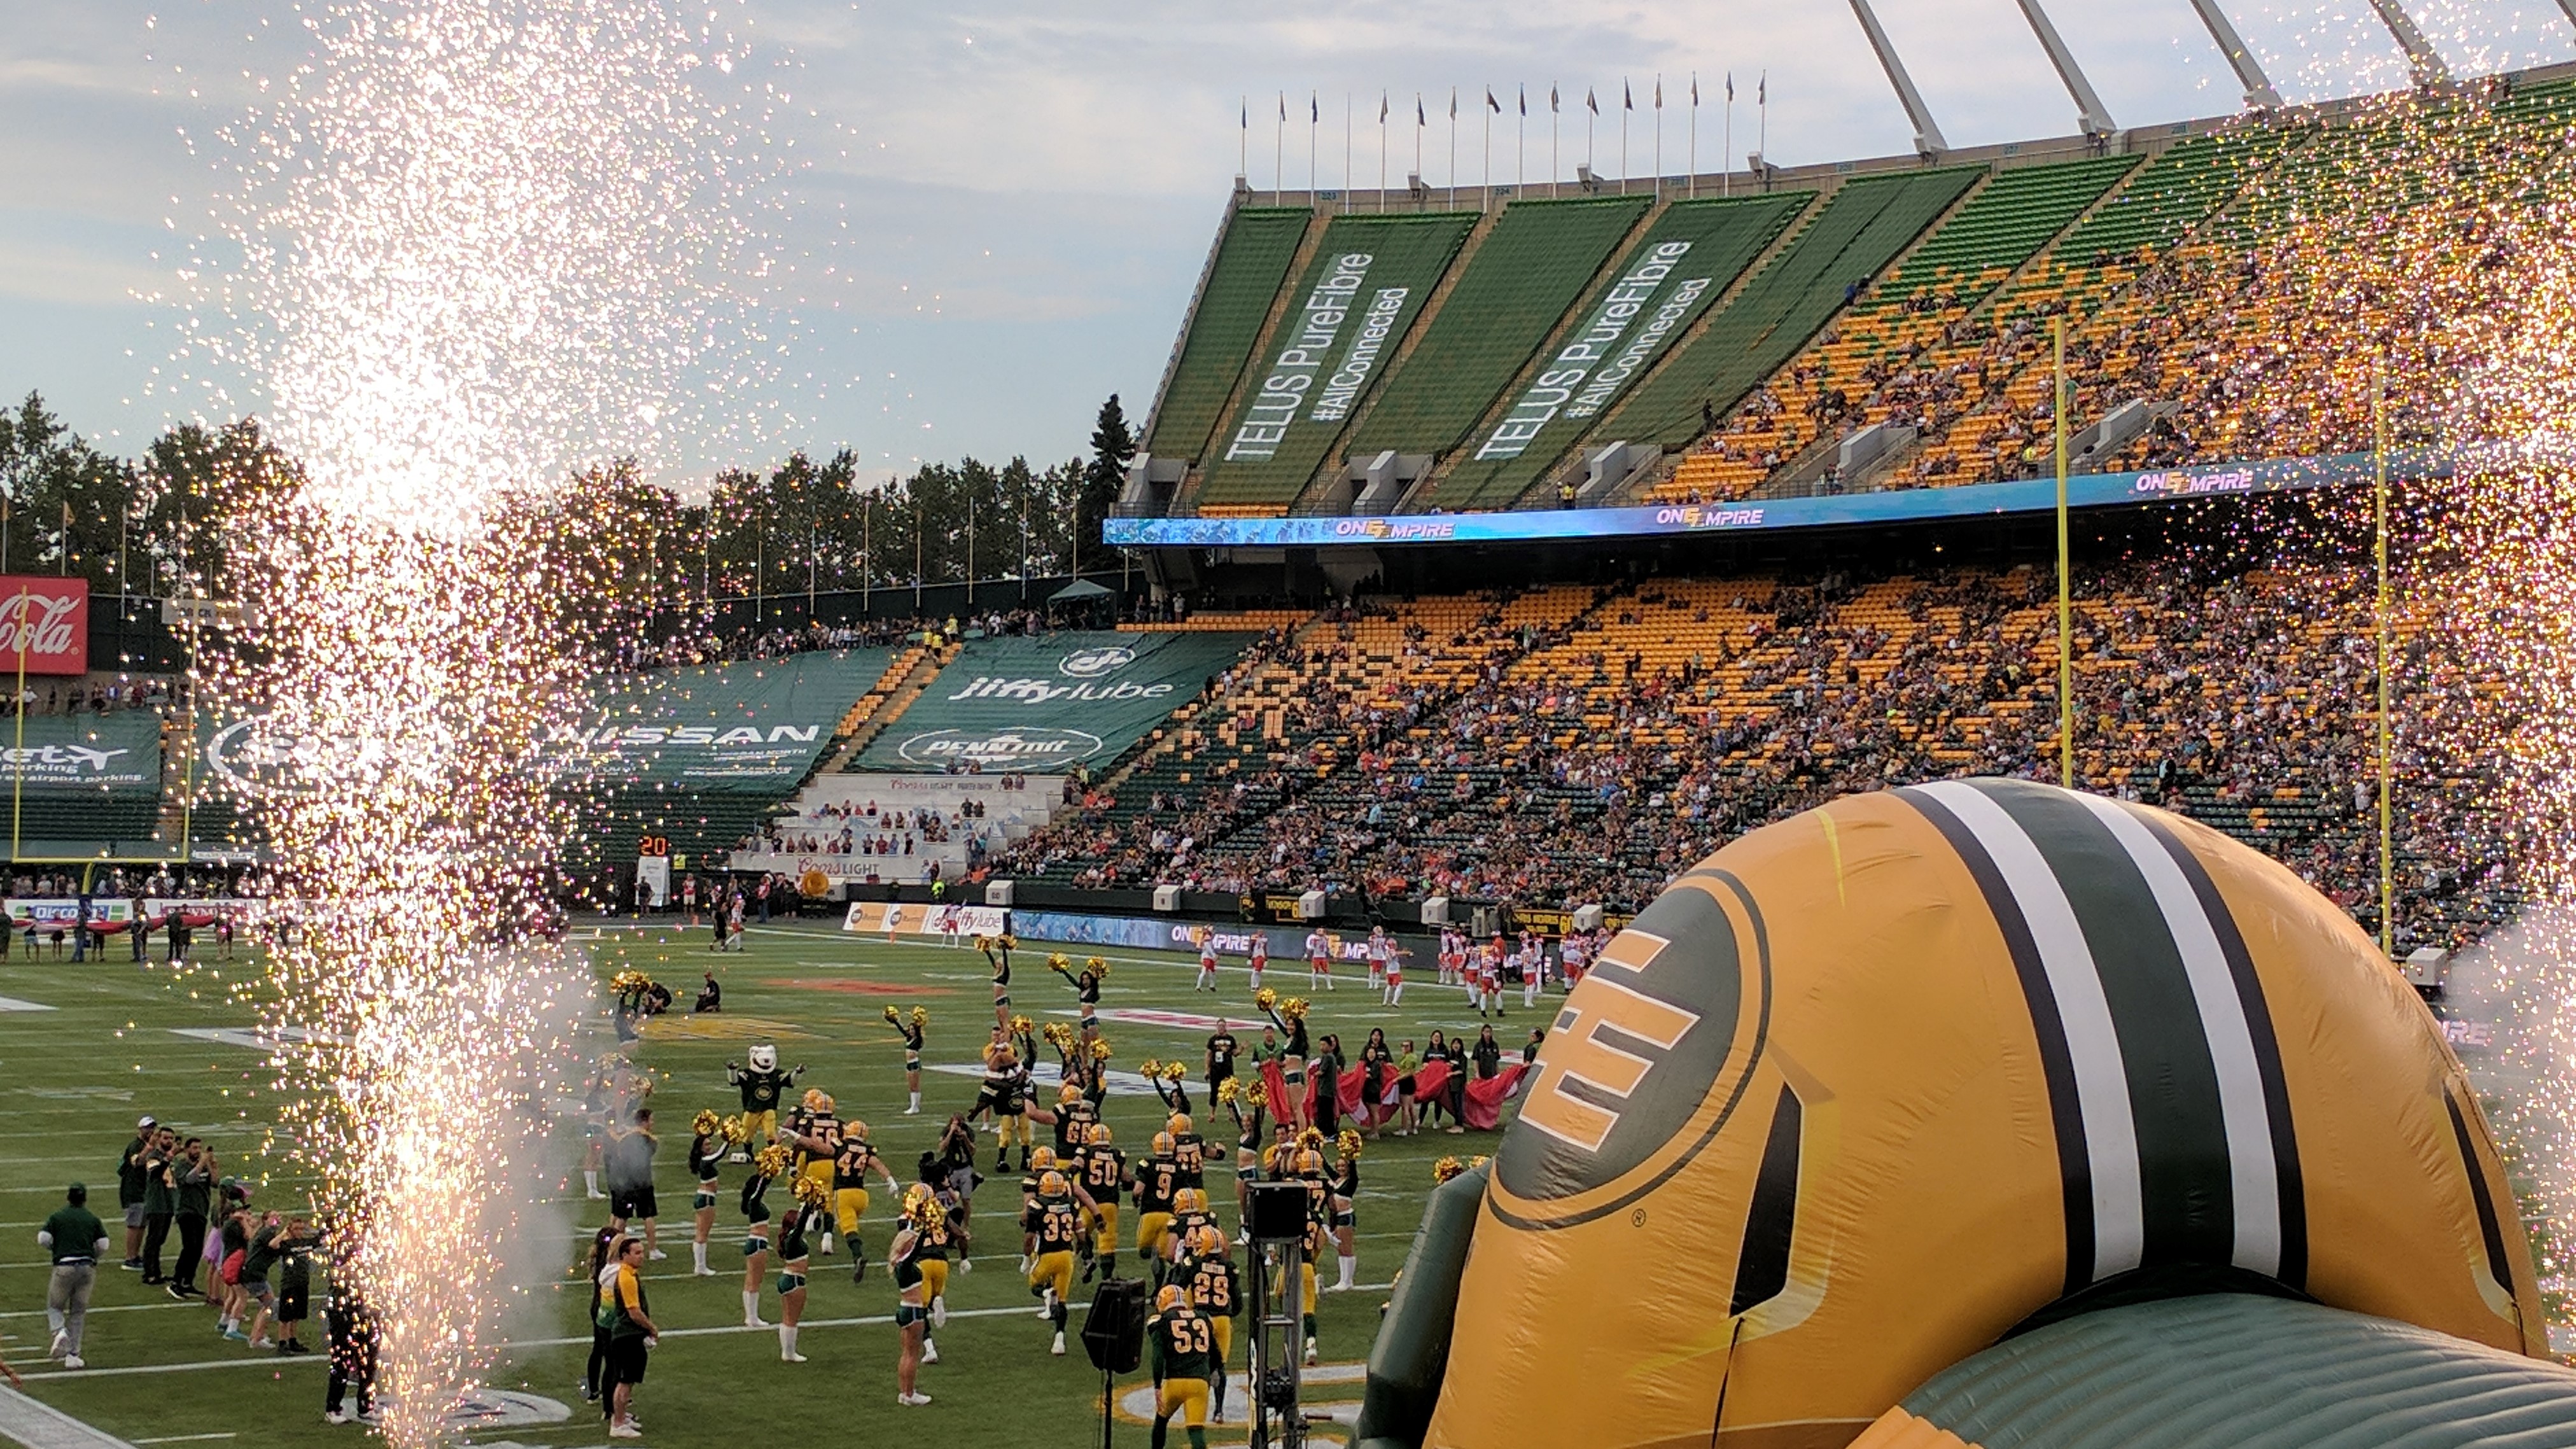 Edmonton Eskmos charge onto the field at a Canadian Football League game in July, 2017